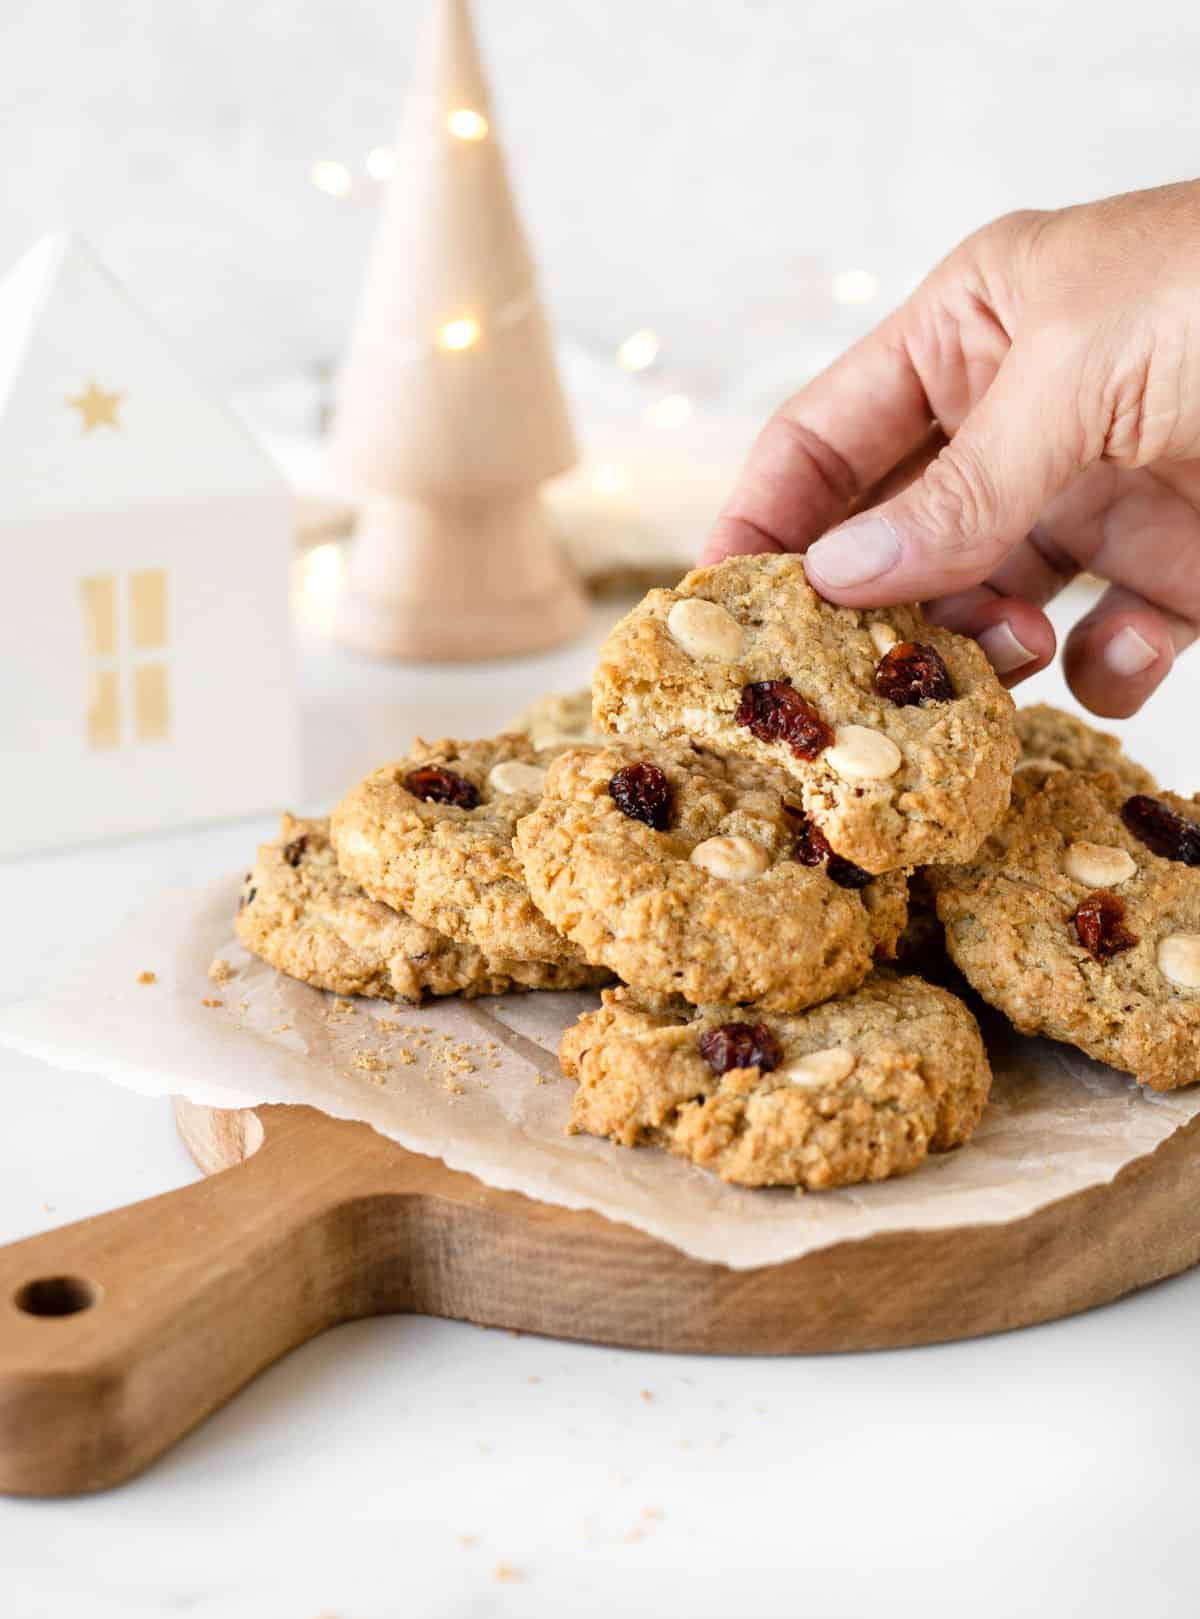 Wooden board with pile of cranberry white chocolate oatmeal cookies. A hand lifting a bitten one. White decorations with lights in the background. 